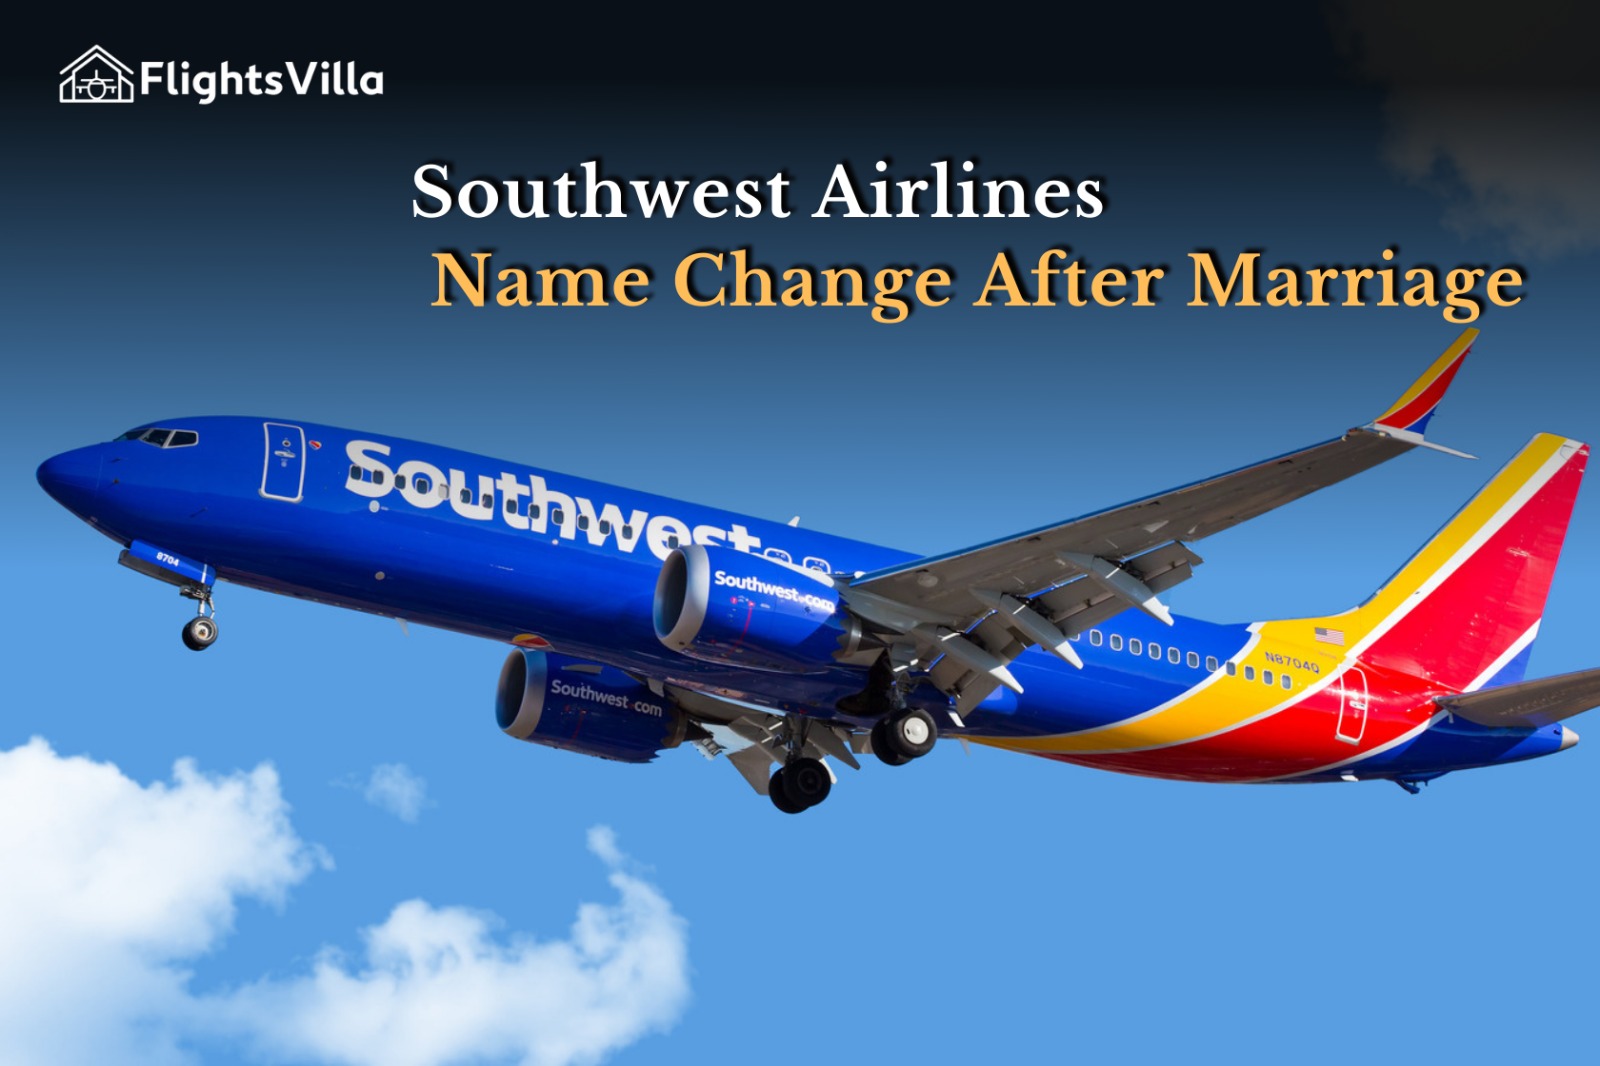 Southwest Airlines Name Change After Marriage